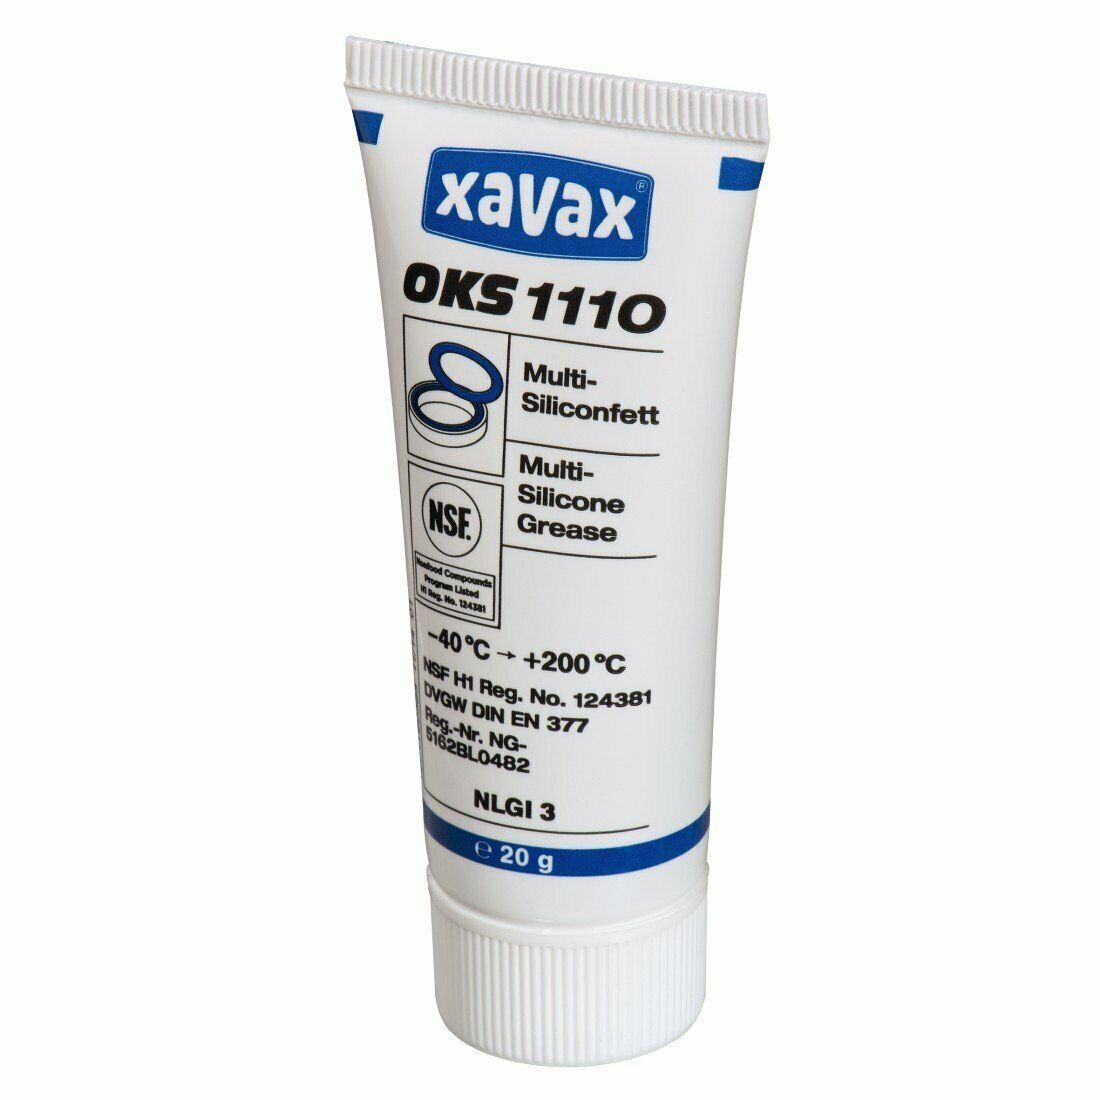 Xavax OKS 1110 Multi Silicone Grease, 20g, Food Safe, For Automatic Coffee Machine Lubrication